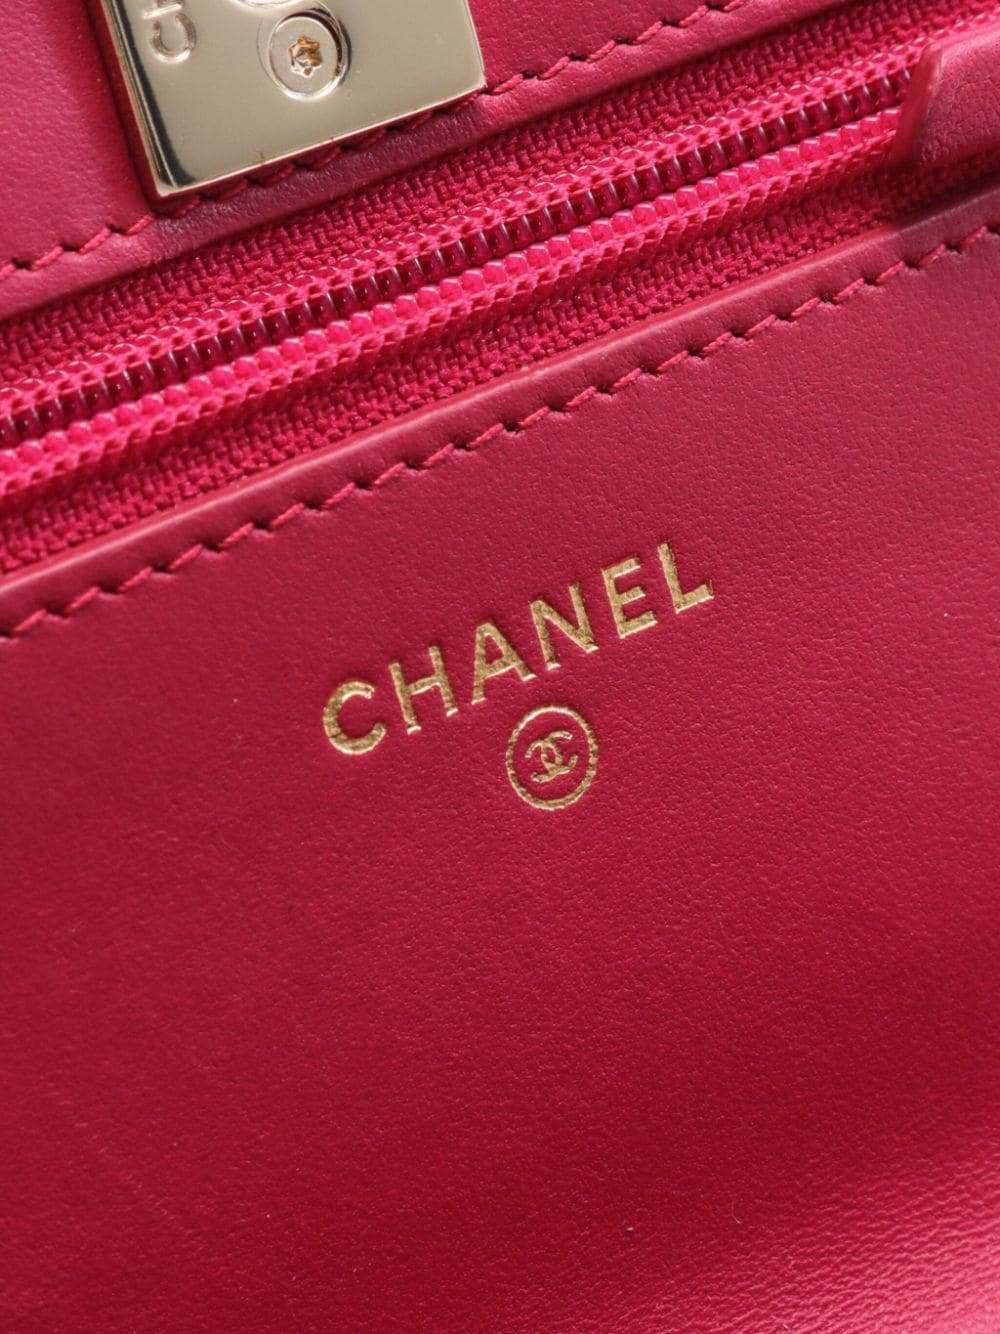 Pre-owned Chanel 菱纹绗缝搭链钱包（2016-2017年典藏款） In Pink